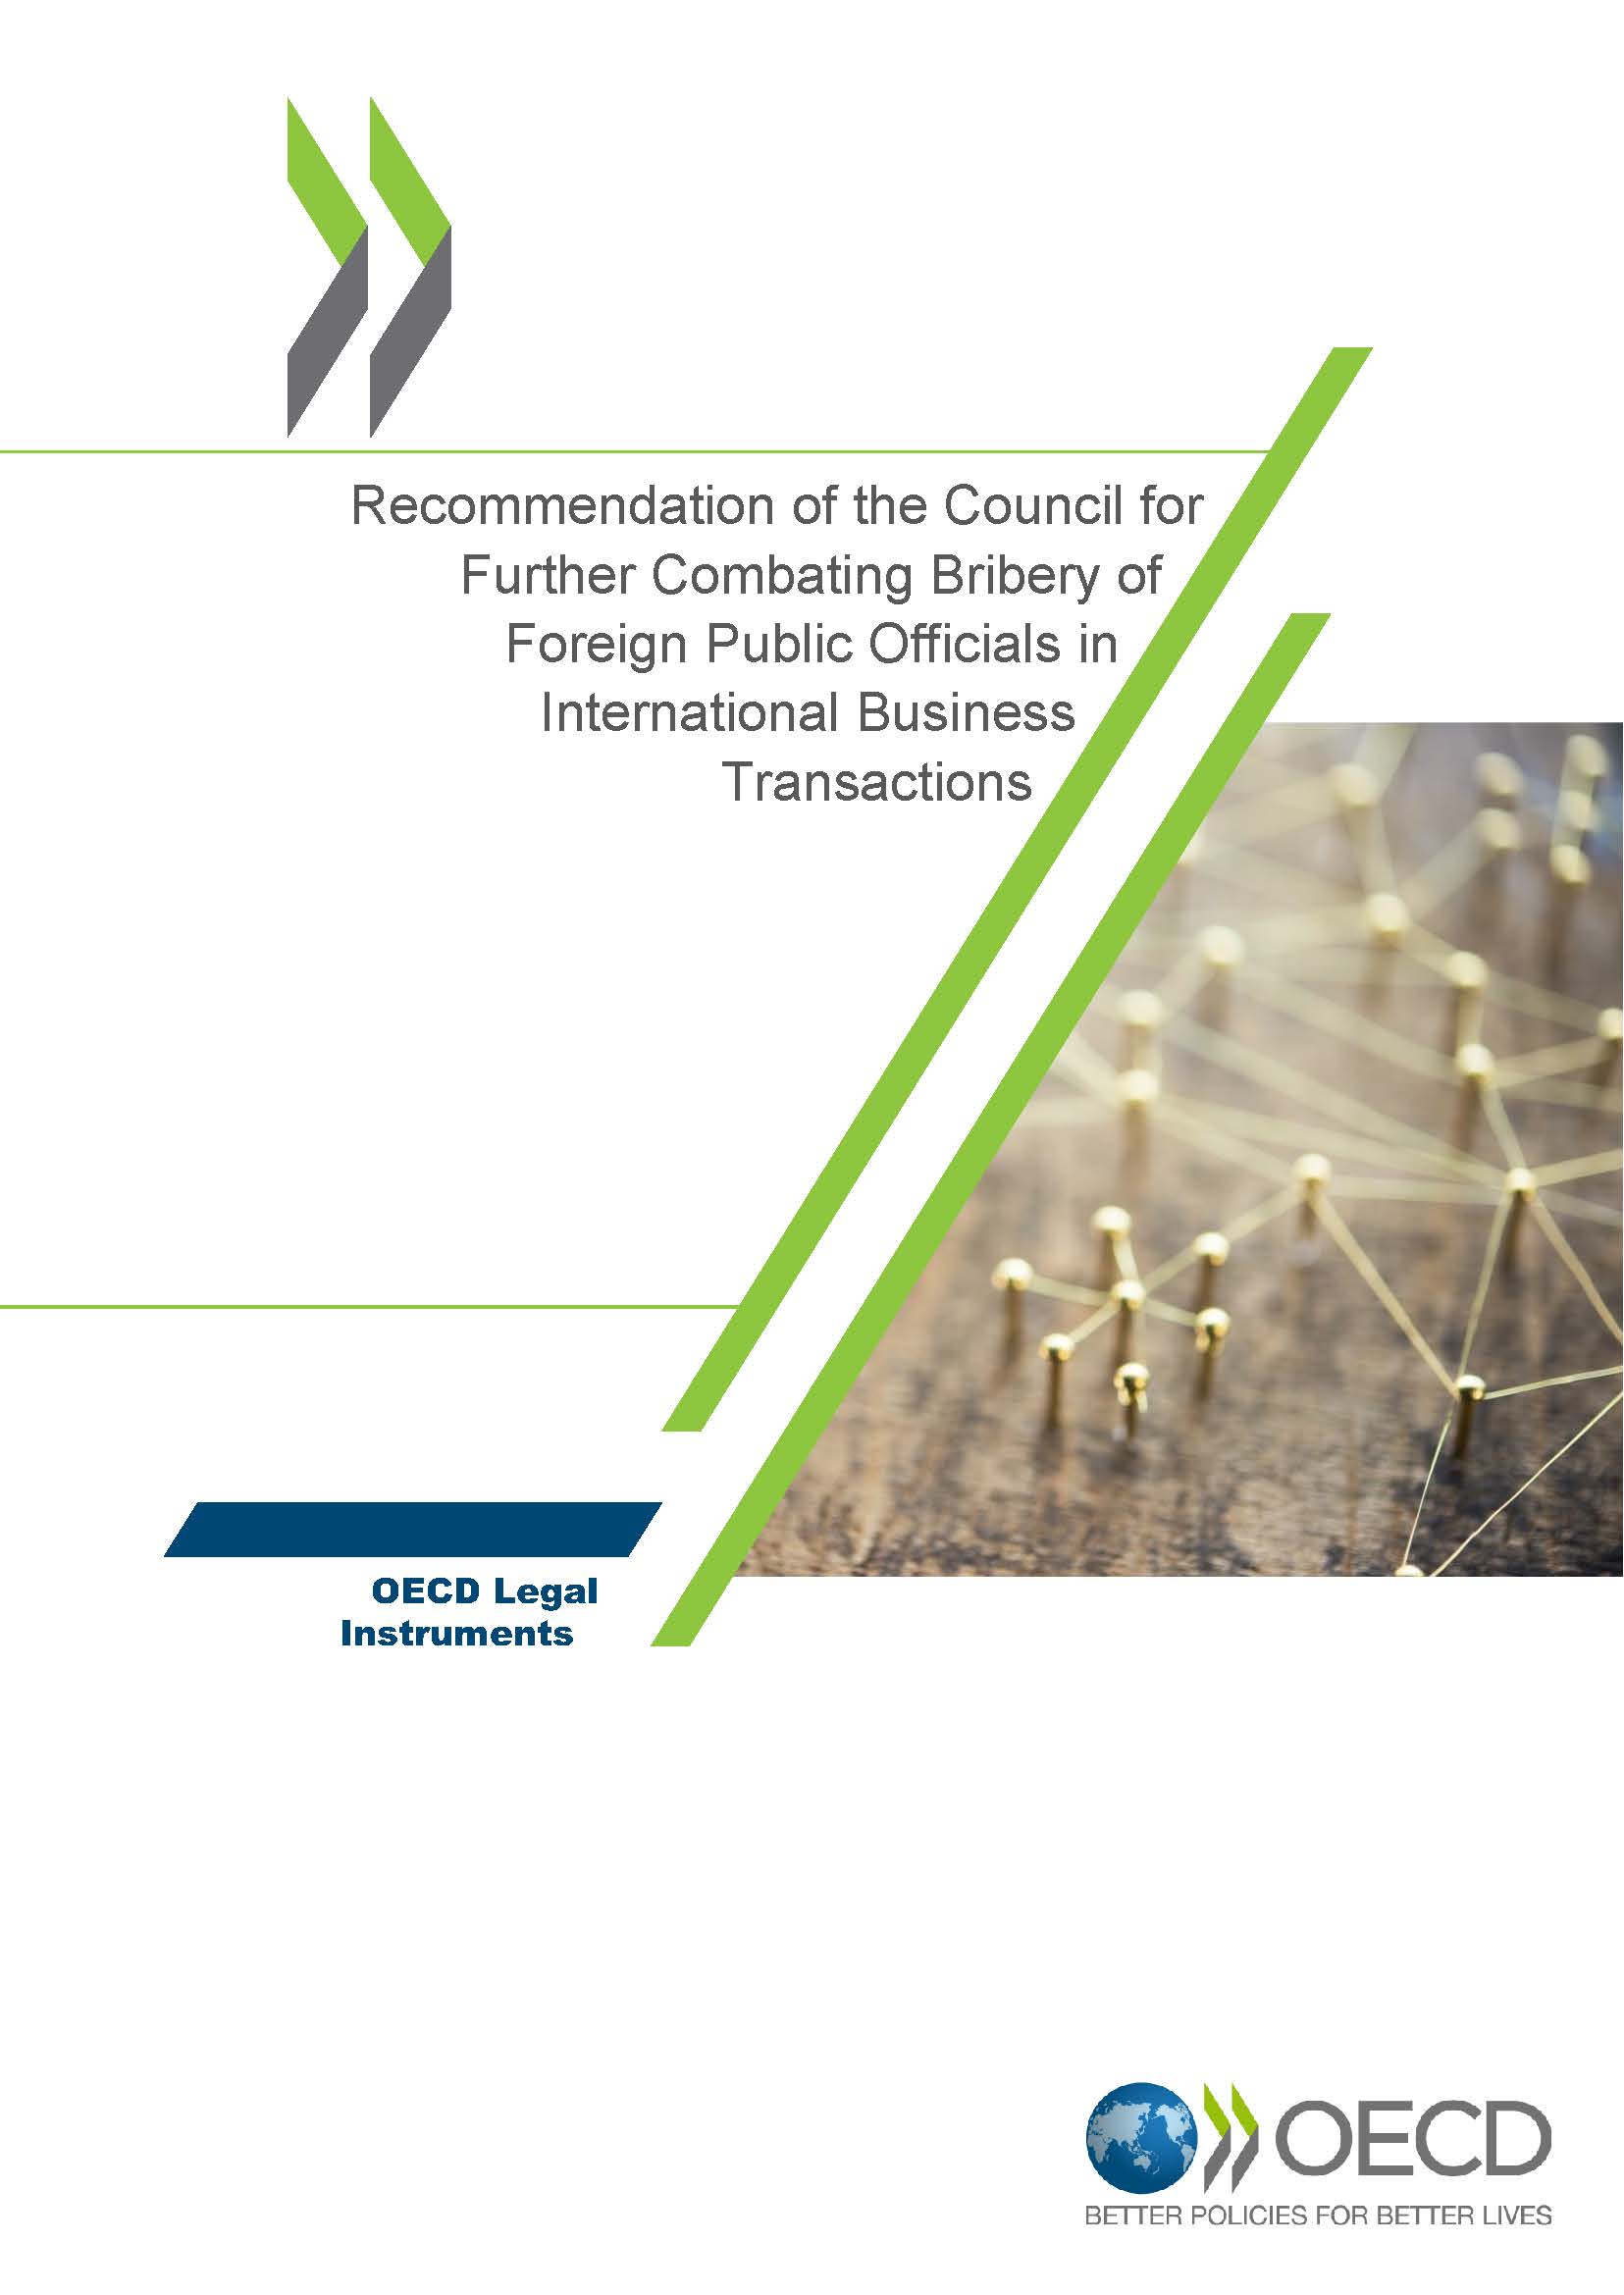 Cover page of Recommendation of the Council for OECD Further Combating Bribery of Foreign Public Officials in International Business Transactions